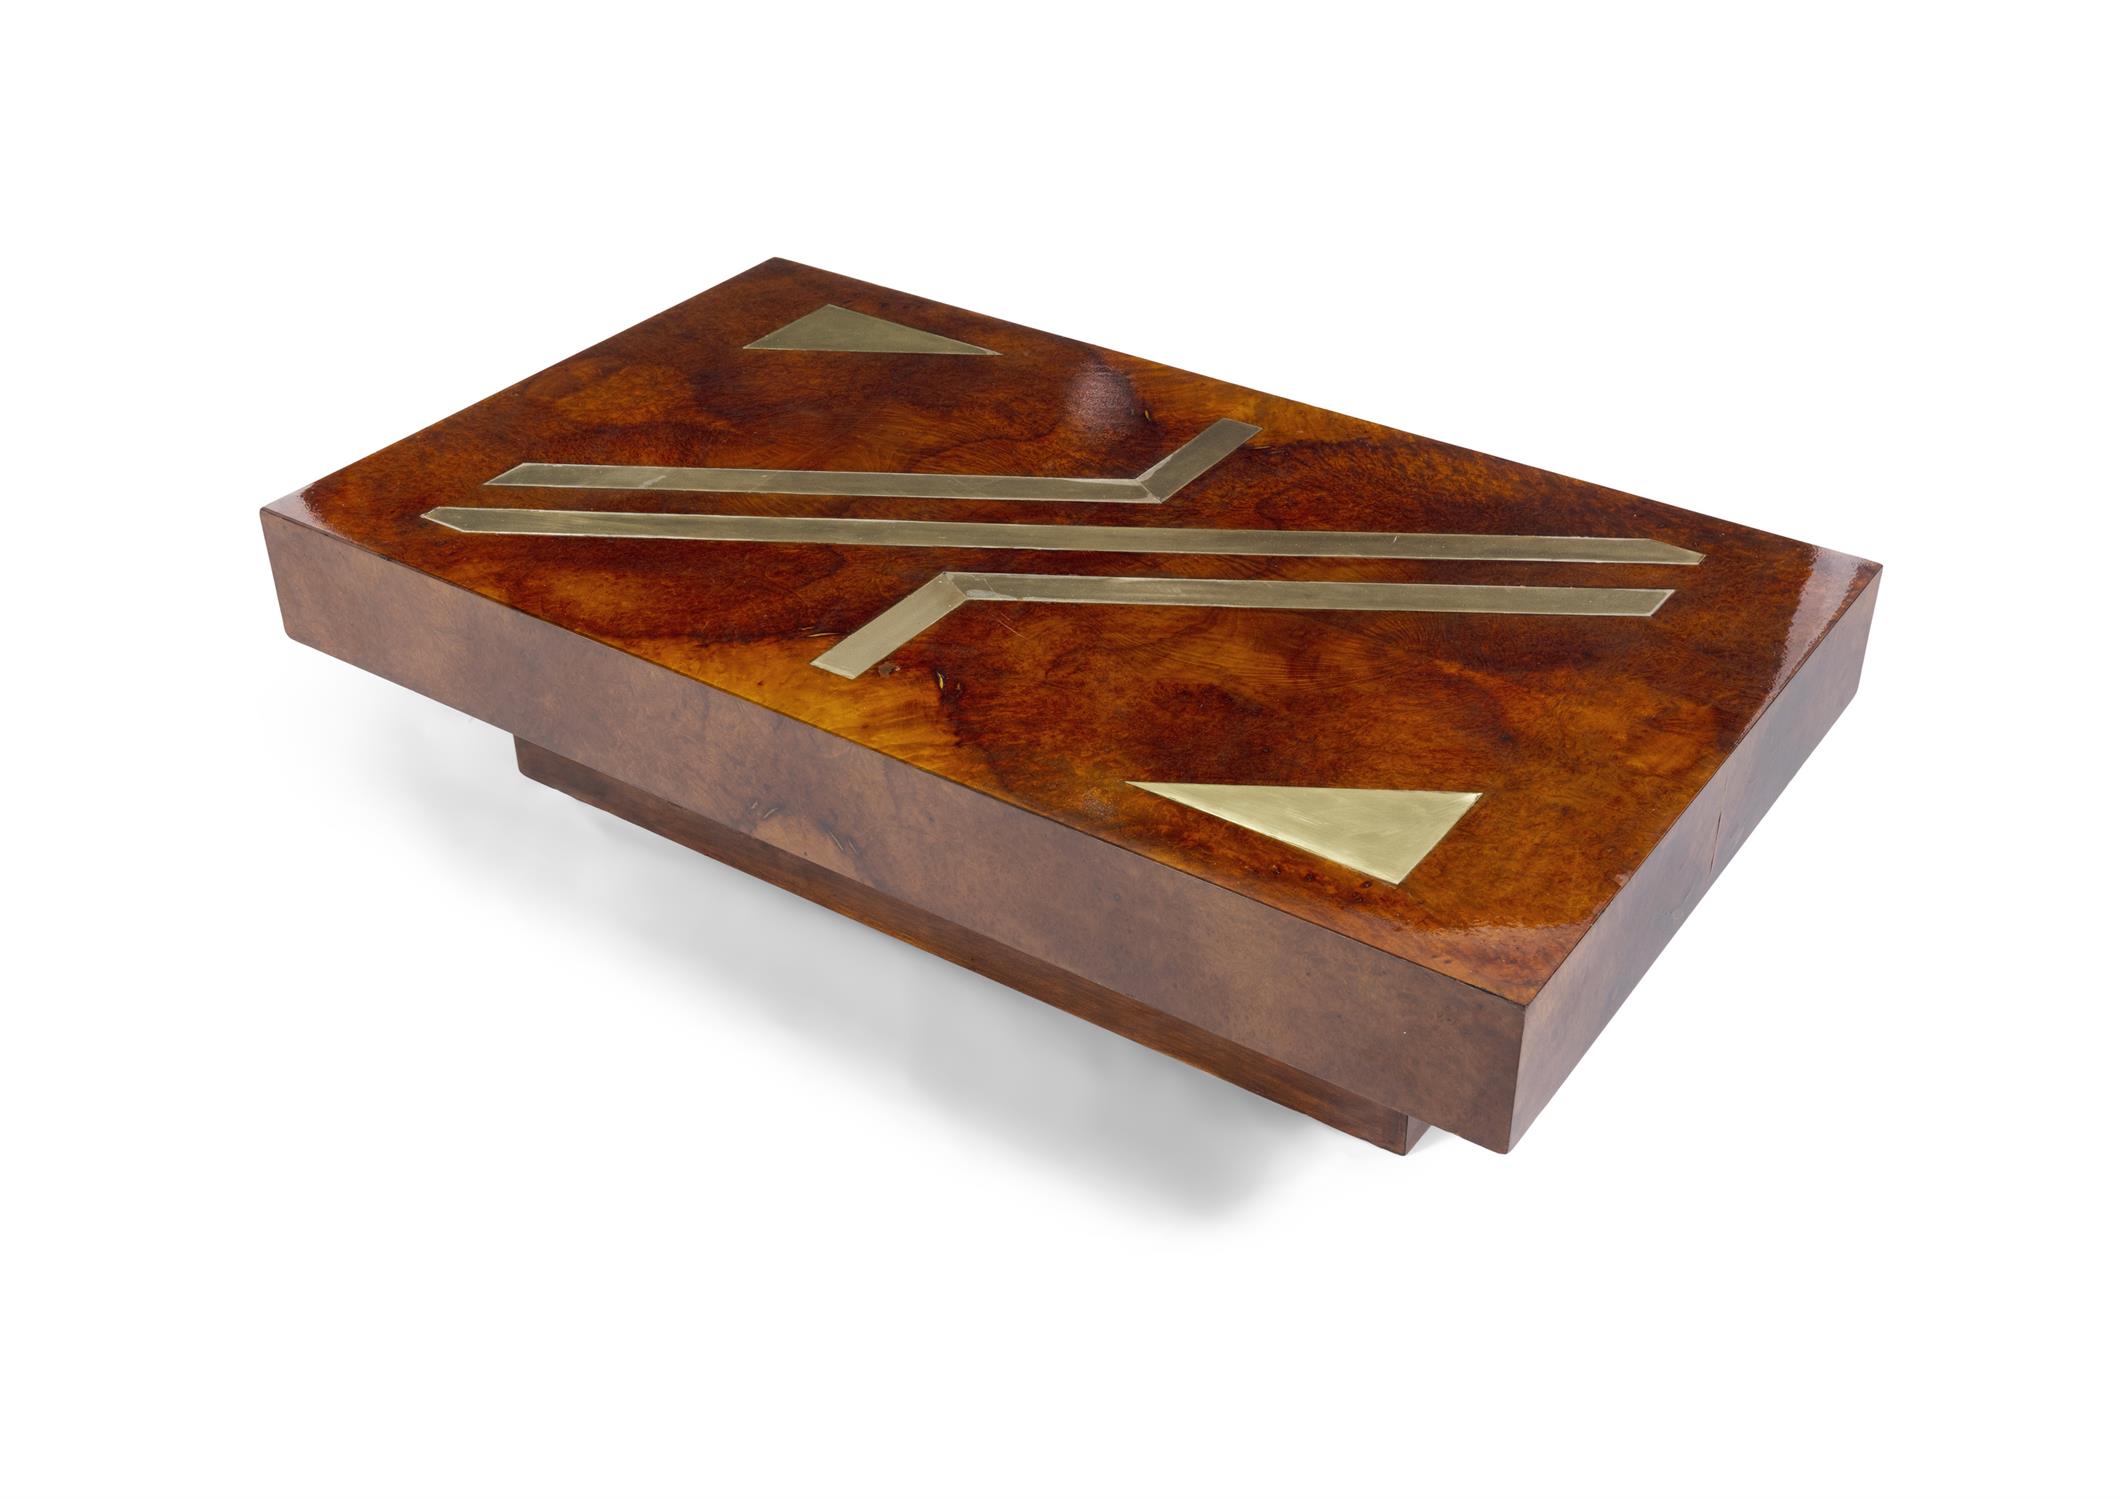 COFFEE TABLE A burl wood coffee table with brass inlays. Italy. 140 x 80 x 35.5cm(h) - Image 2 of 5